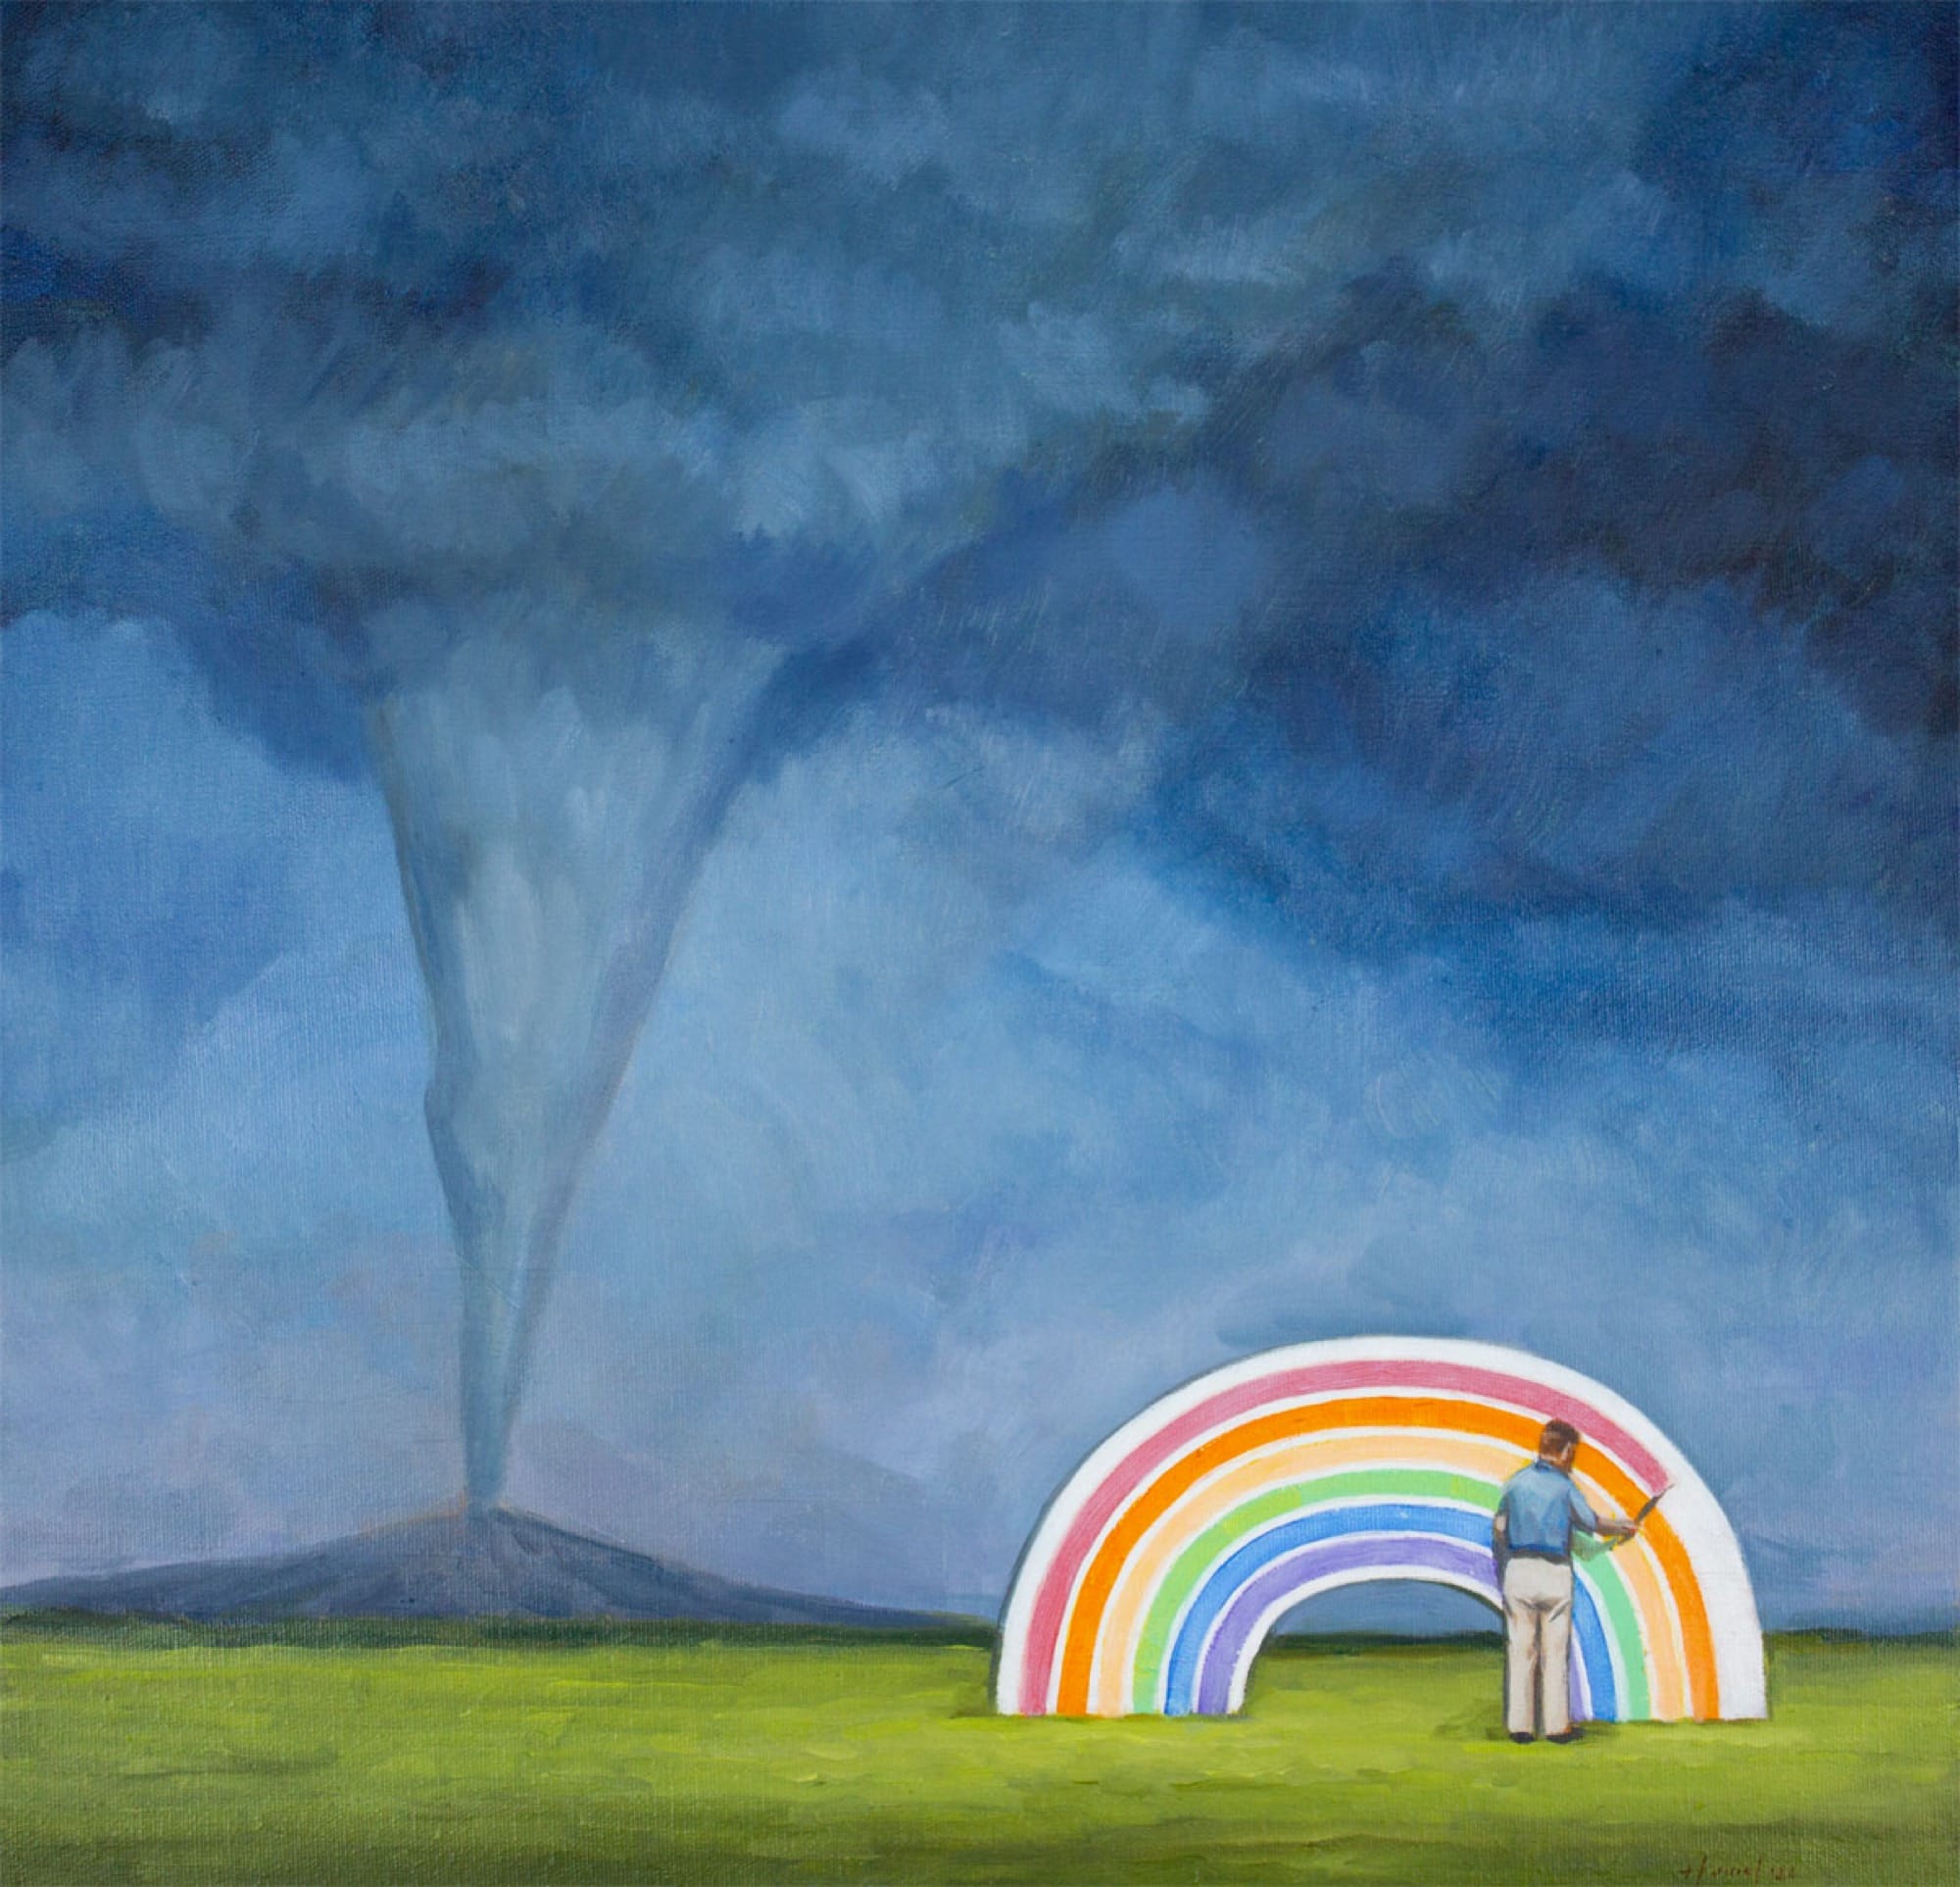 a man paints a rainbow while a massive funnel appears above a distant mountain